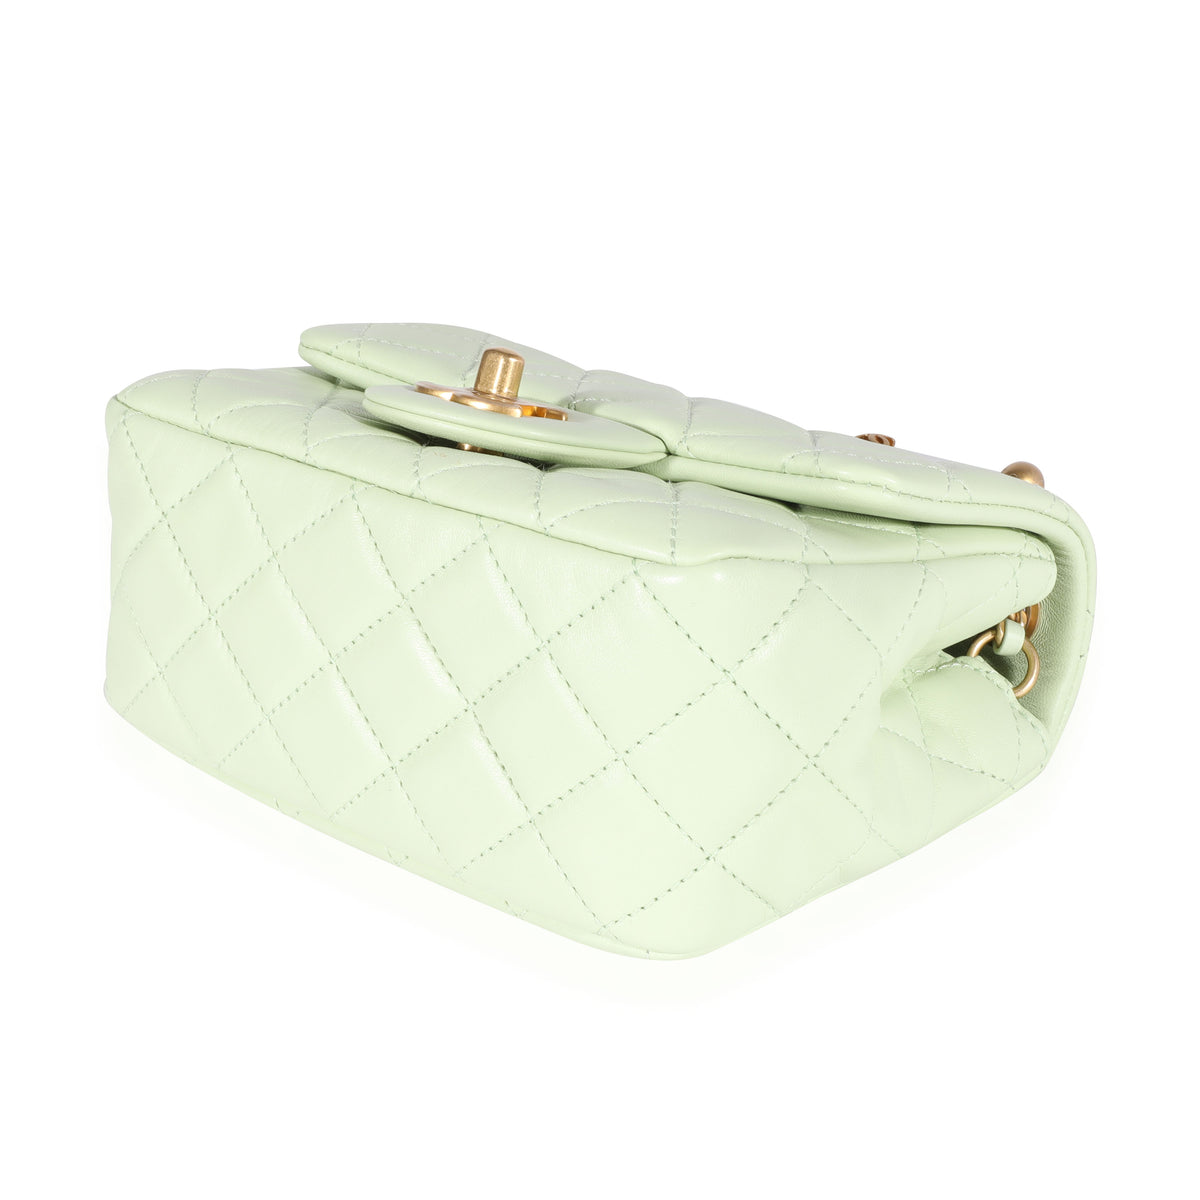 CHANEL Lambskin Quilted Mini Square Flap Green 1311561